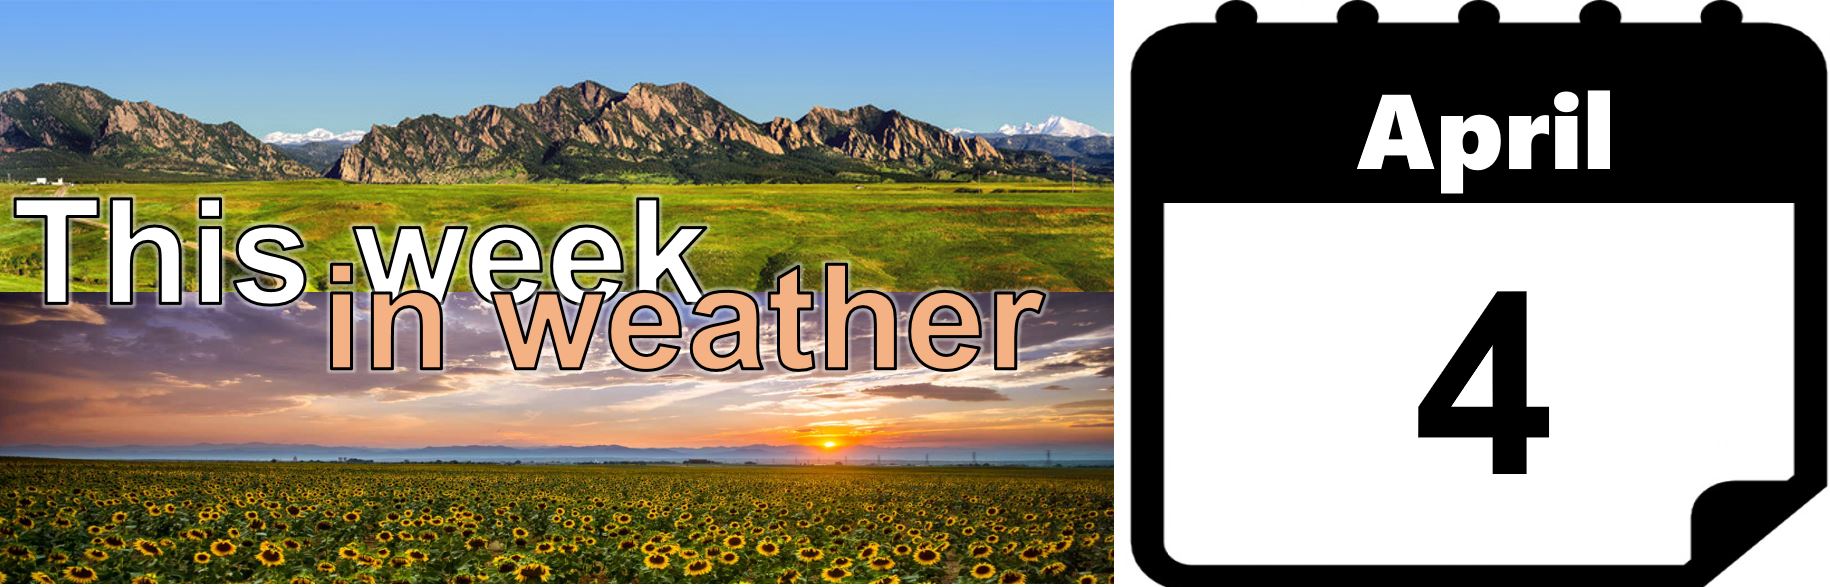 This week in weather April 4, 2016 BoulderCAST